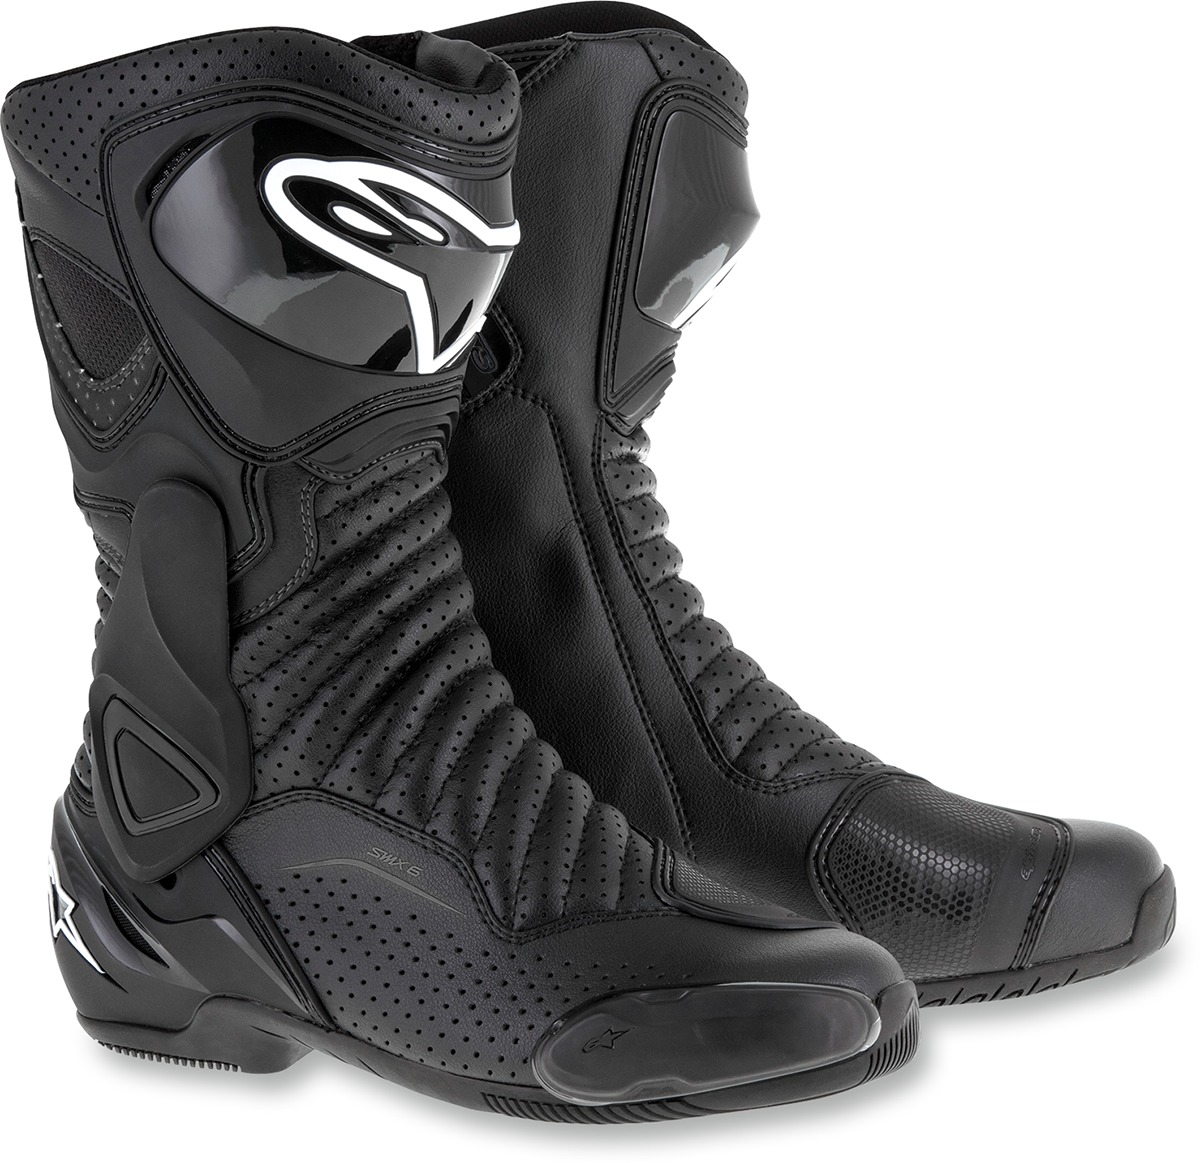 SMX-6v2 Vented Street Riding Boots Black US 12 - Click Image to Close